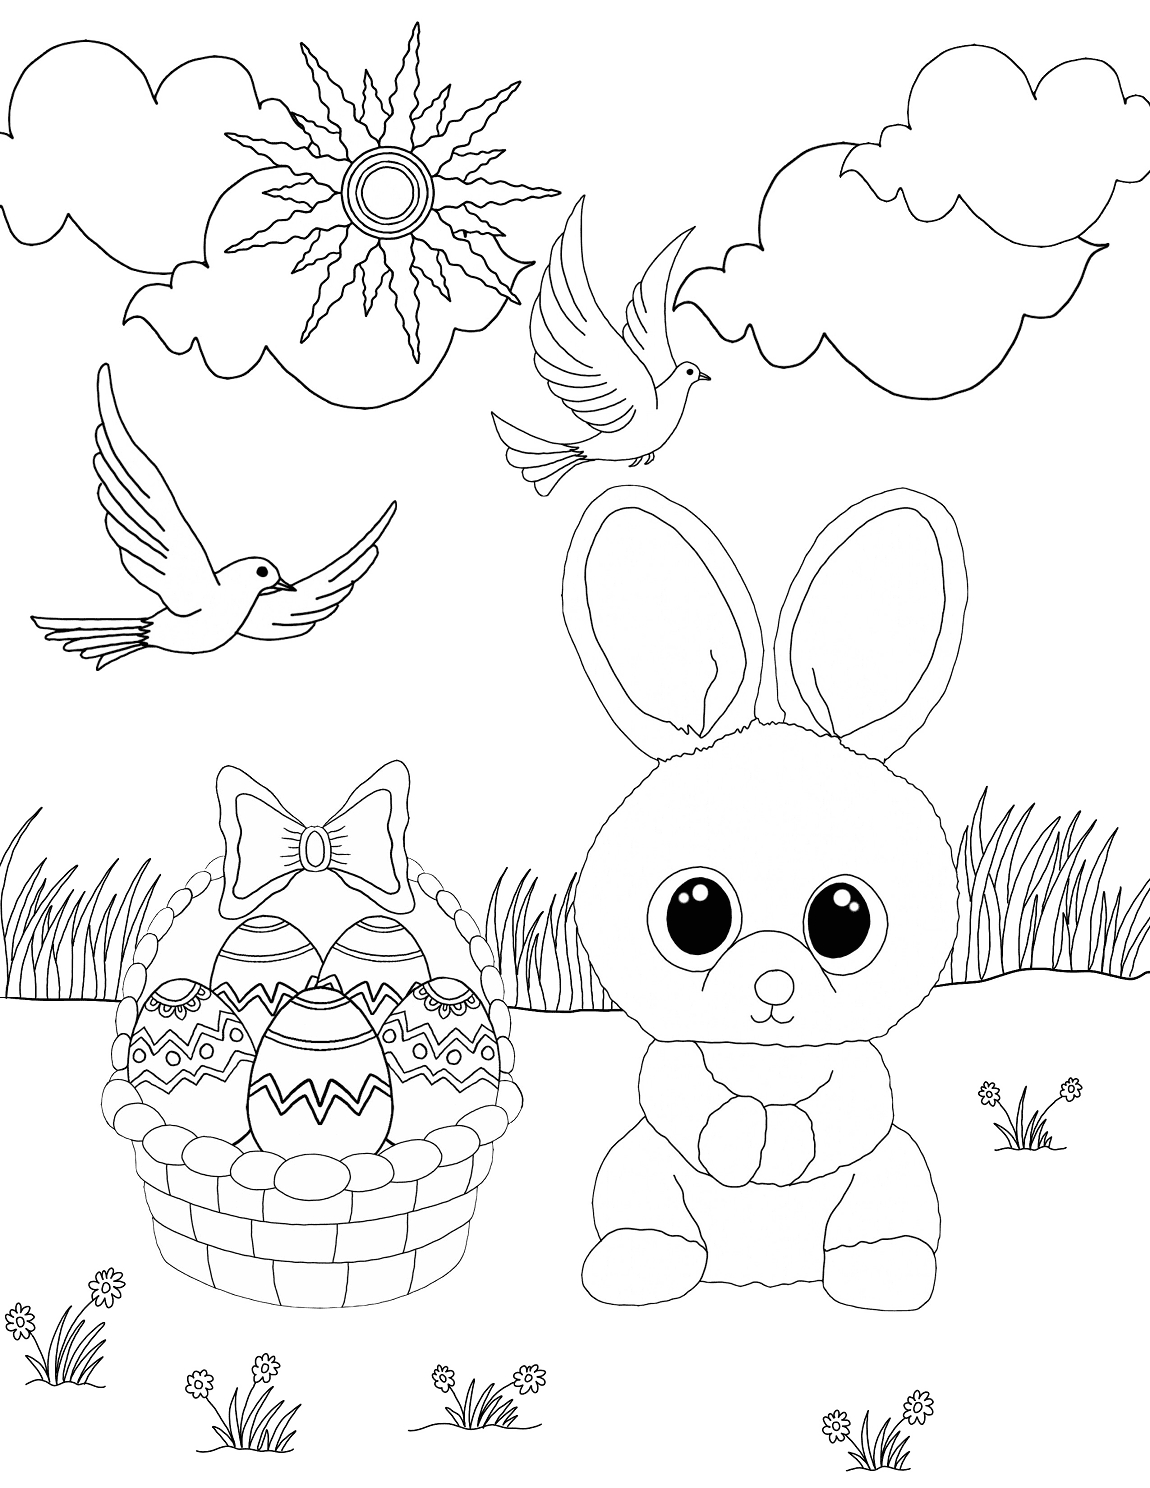 Beanie Boos Easter Coloring Page